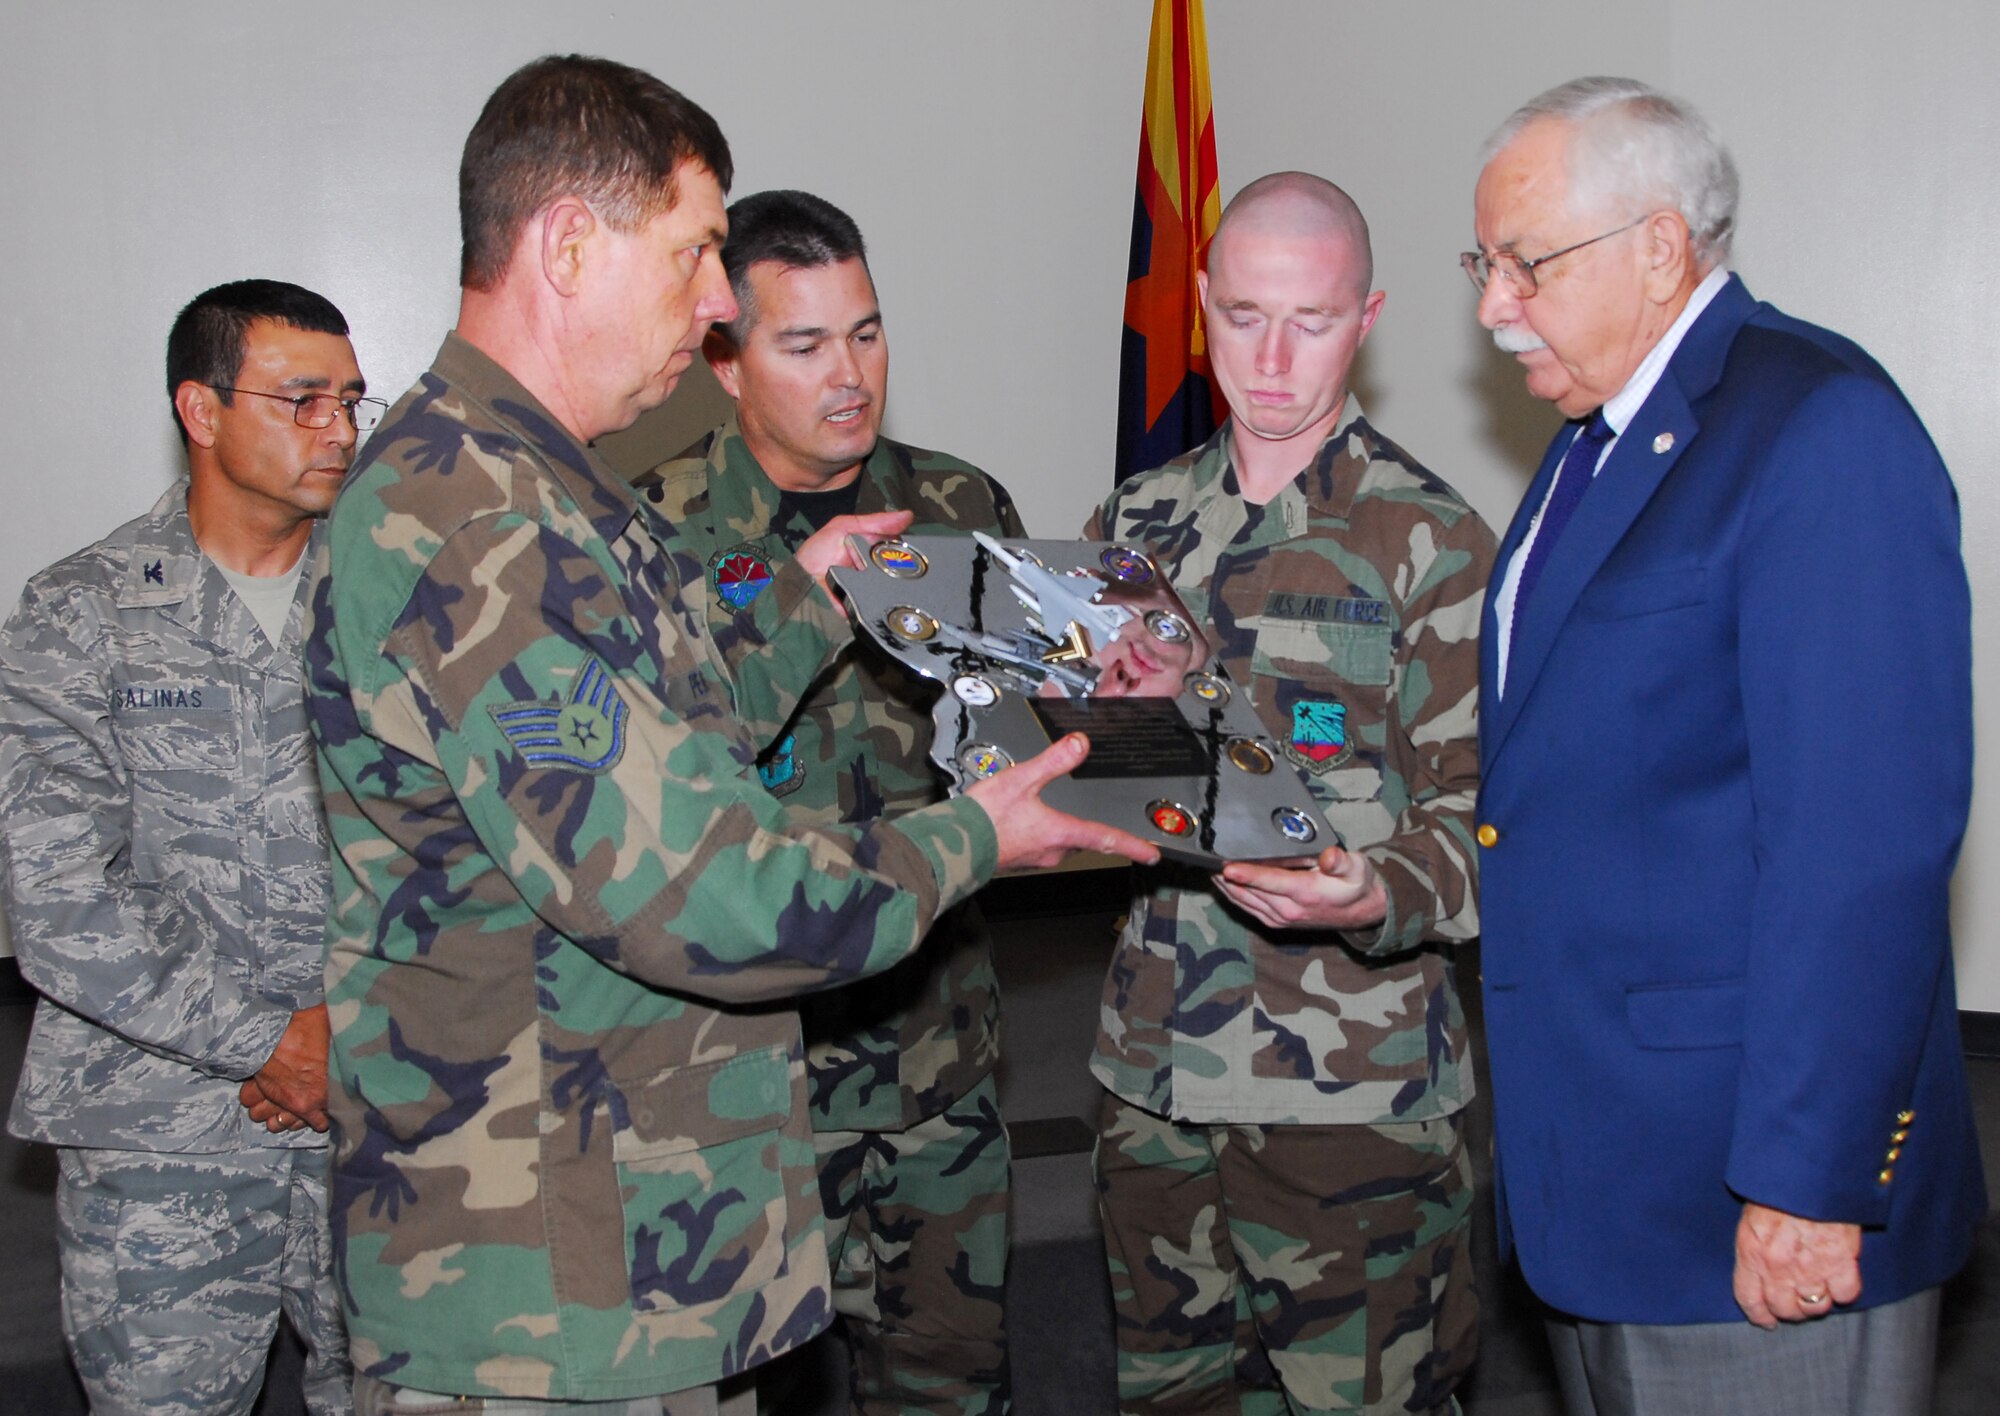 (From left to right) Col. Jose Salinas, vice wing commander, looks on while Staff Sgt. Robert Pensas, Master Sgt. Miguel Islas, and Senior Airman Ben Koughn present Mr. William Valenzuela a chromed plaque they constructed by hand. The plaque reads, “The 162nd recognizes Mr. William Valenzuela for his outstanding support of the military and their families. Your tireless efforts on behalf of our unit are a shining example of your patriotism and deep love for those who wear the uniform. In celebration of Hispanic Heritage Month we are proud to call you a true friend and compadre.” (Air National Guard photo by Master Sgt. Dave Neve)